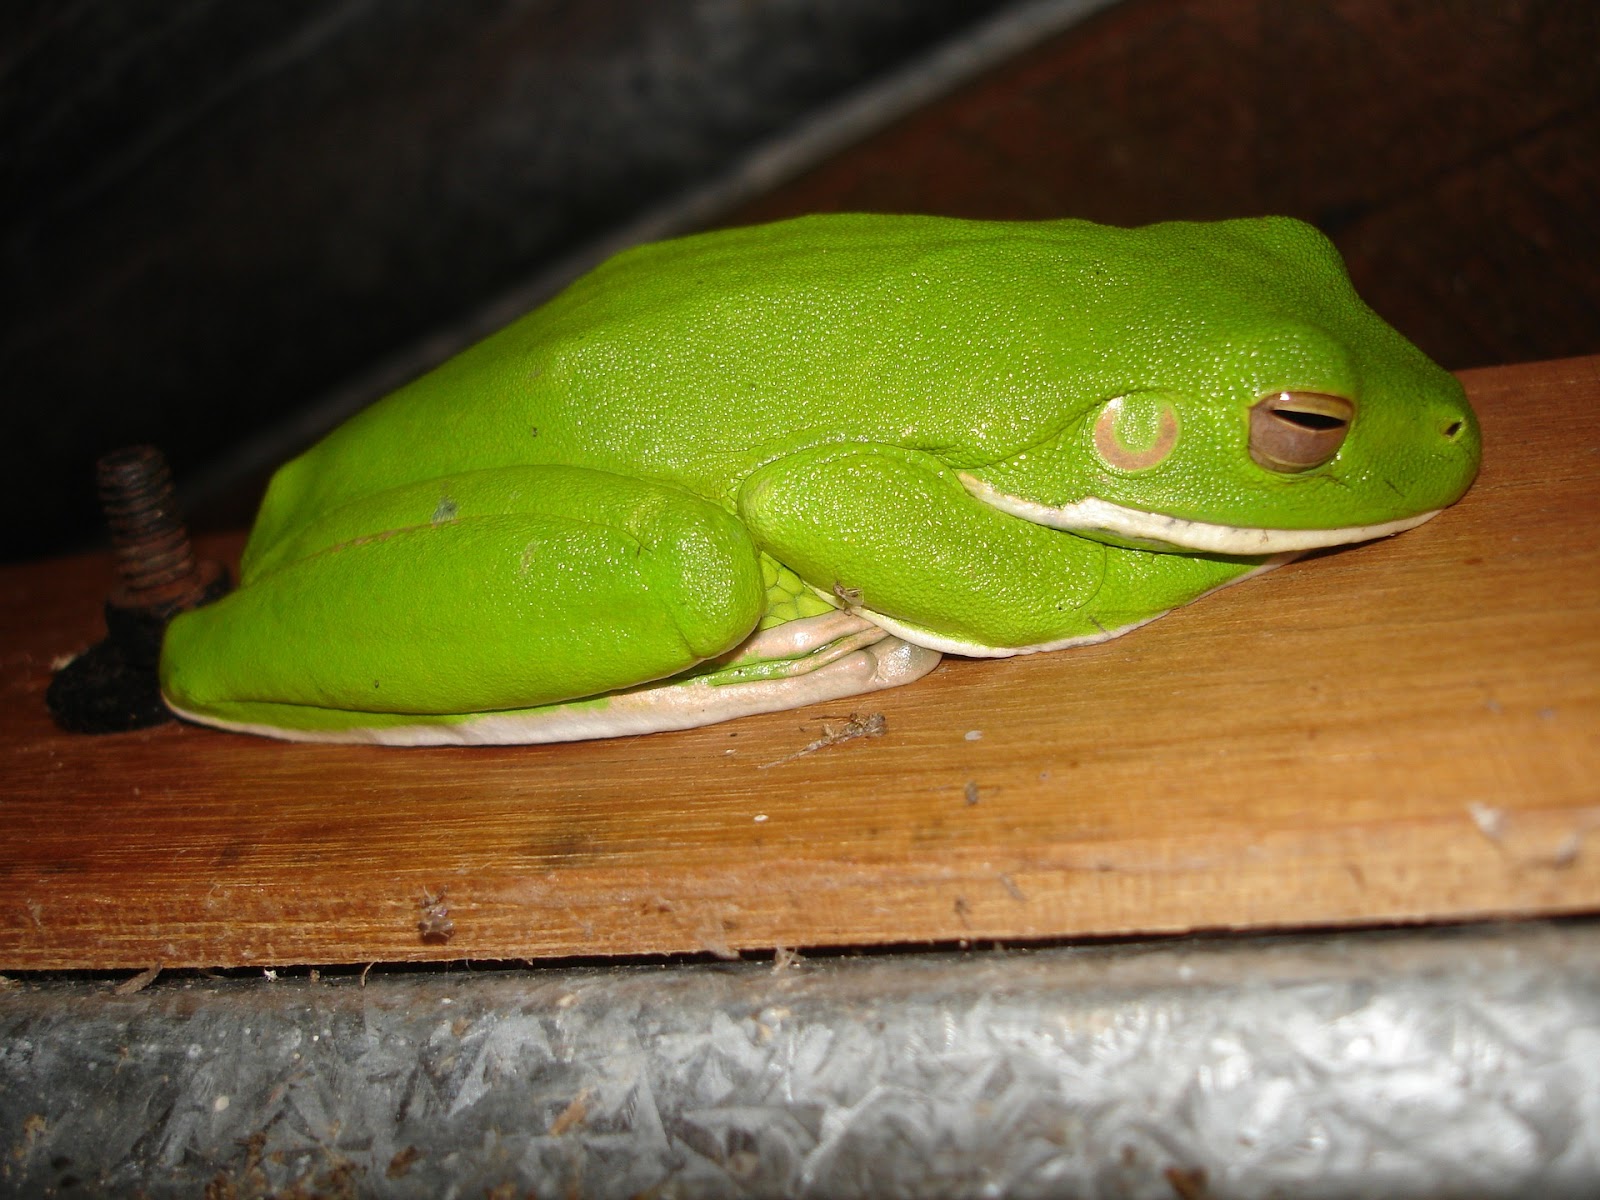 A White's tree frog resting on a wooden ledge